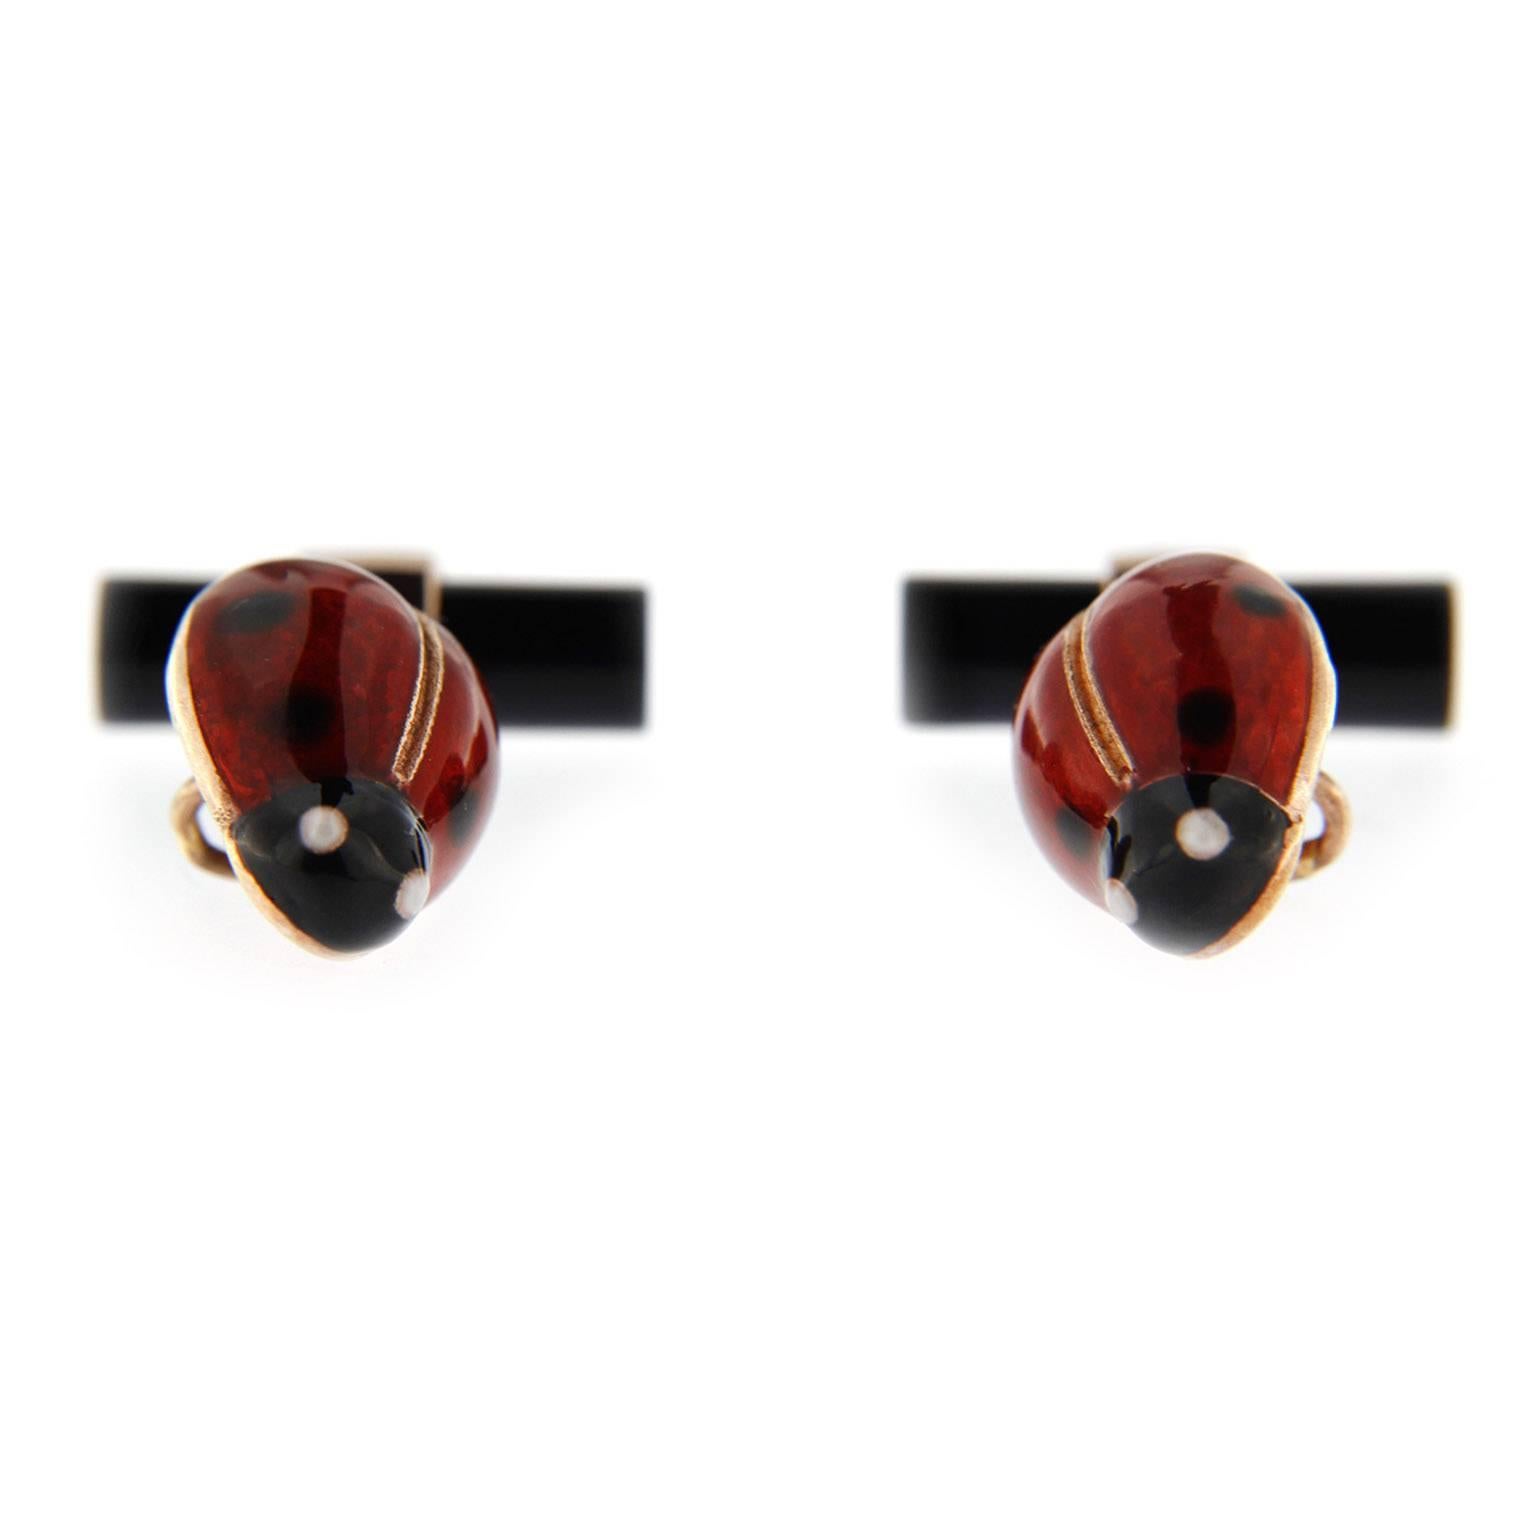 Jona design collection, hand crafted in Italy, 14 karat rose gold and onyx enameled ladybug cufflinks.  
All Jona jewelry is new and has never been previously owned or worn. Each item will arrive at your door beautifully gift wrapped in Jona boxes,